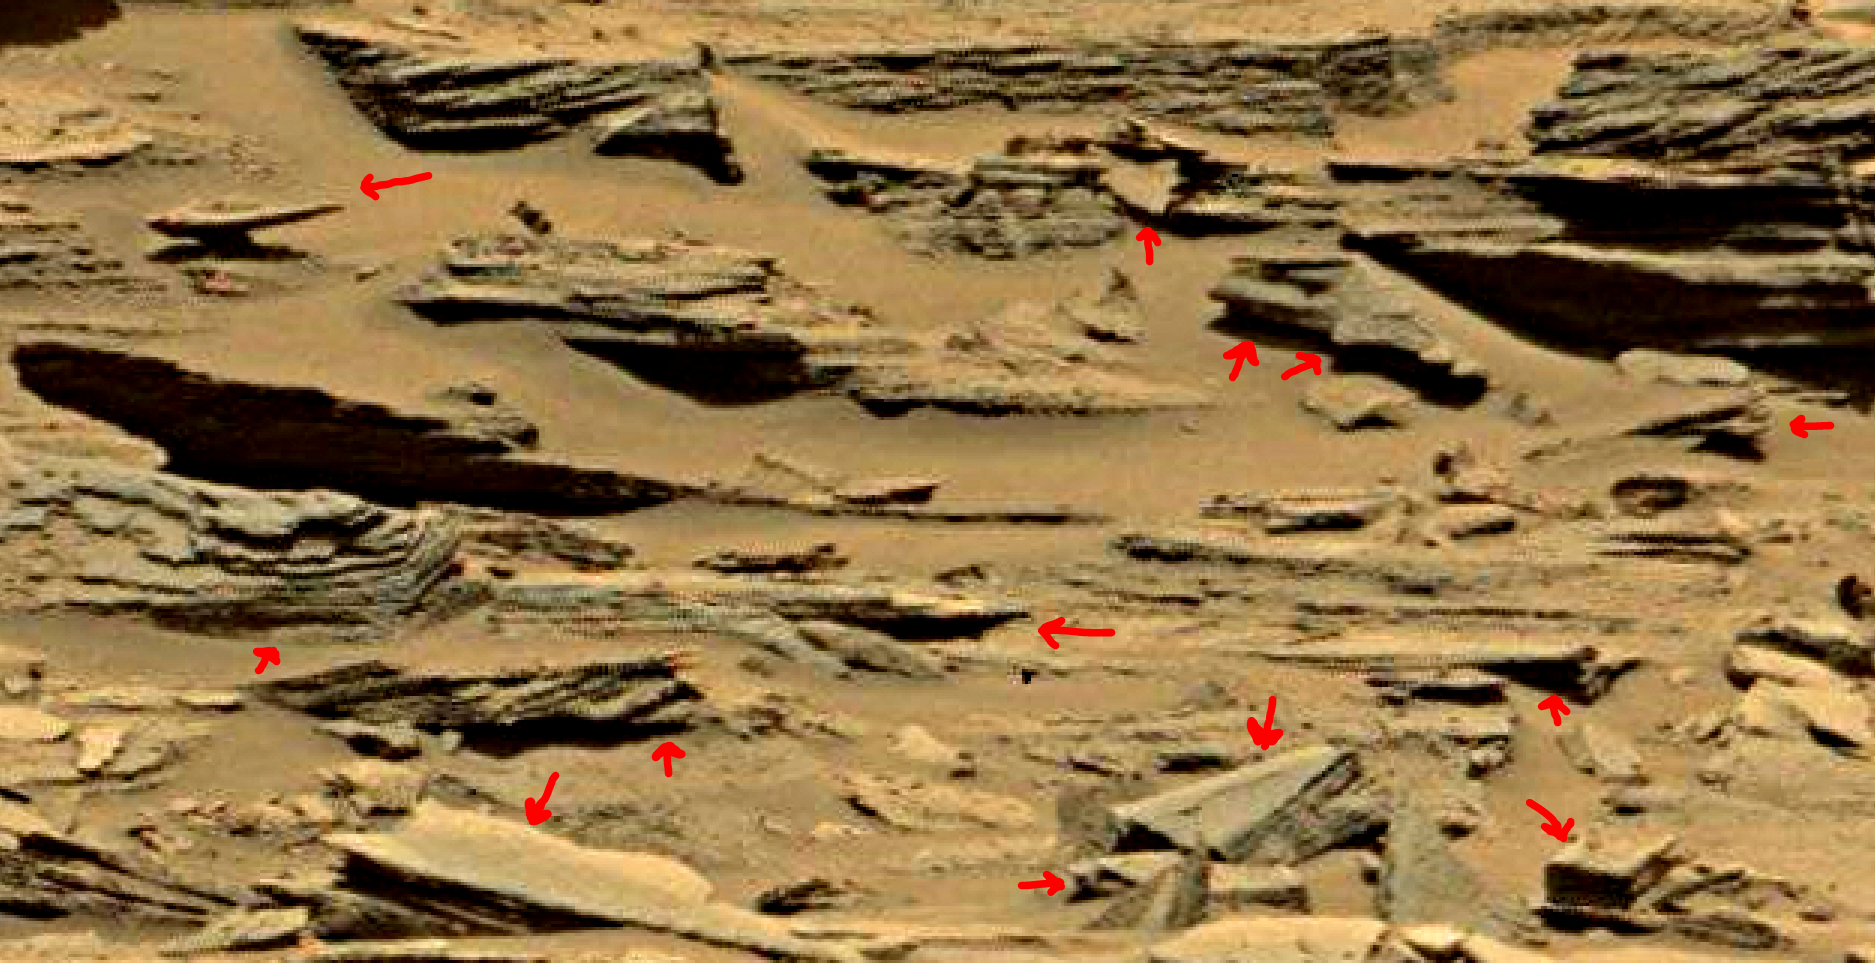 mars sol 1353 anomaly-artifacts 33a was life on mars